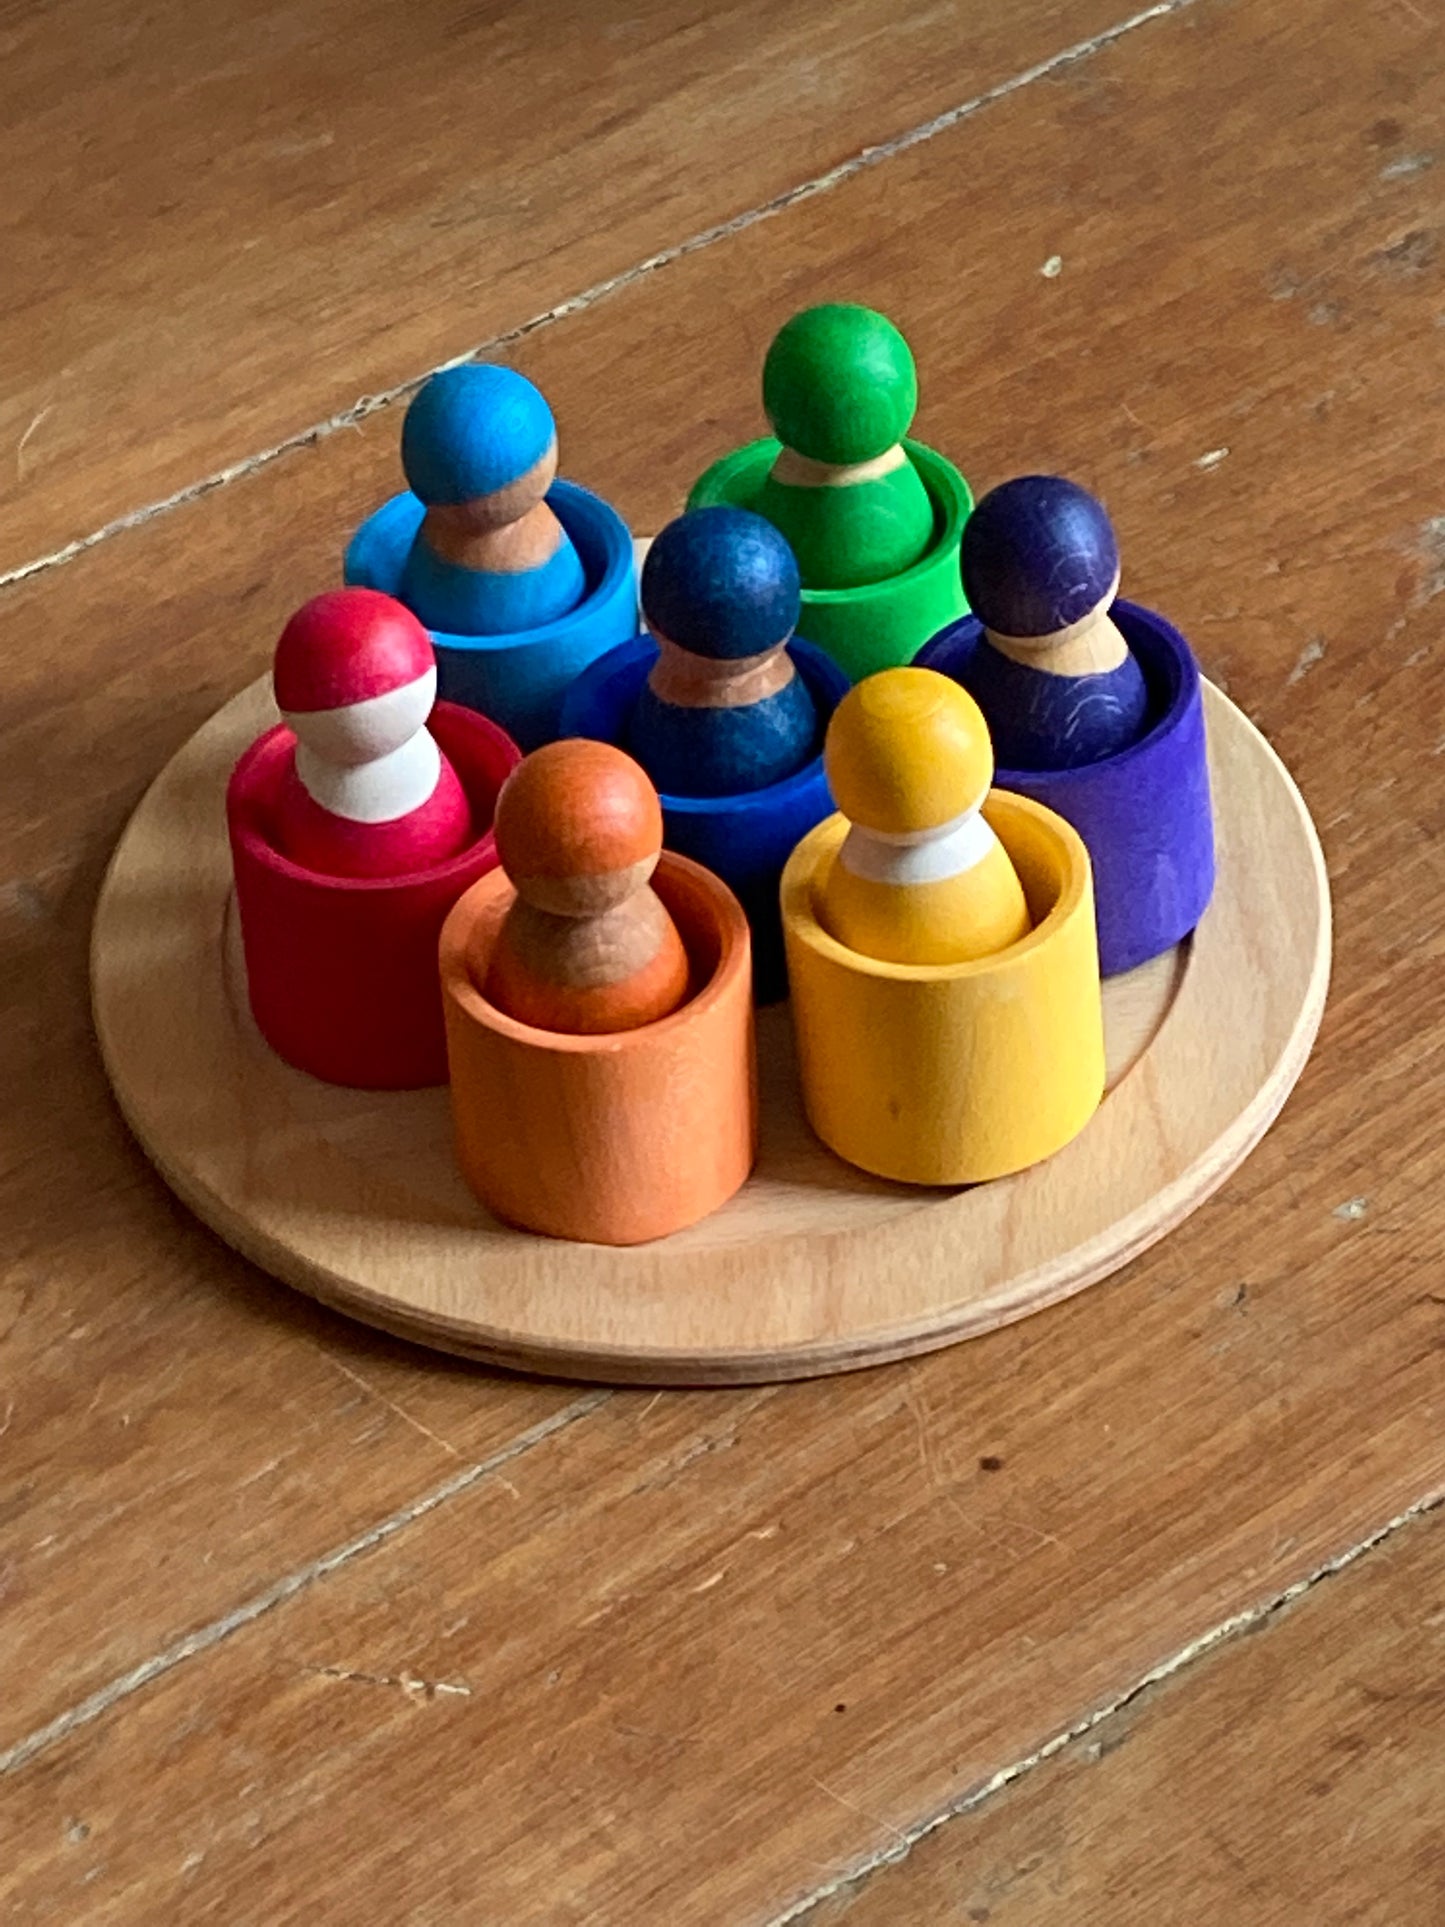 Wooden Toy - RAINBOW FRIENDS in RAINBOW BOWLS, set of 7!